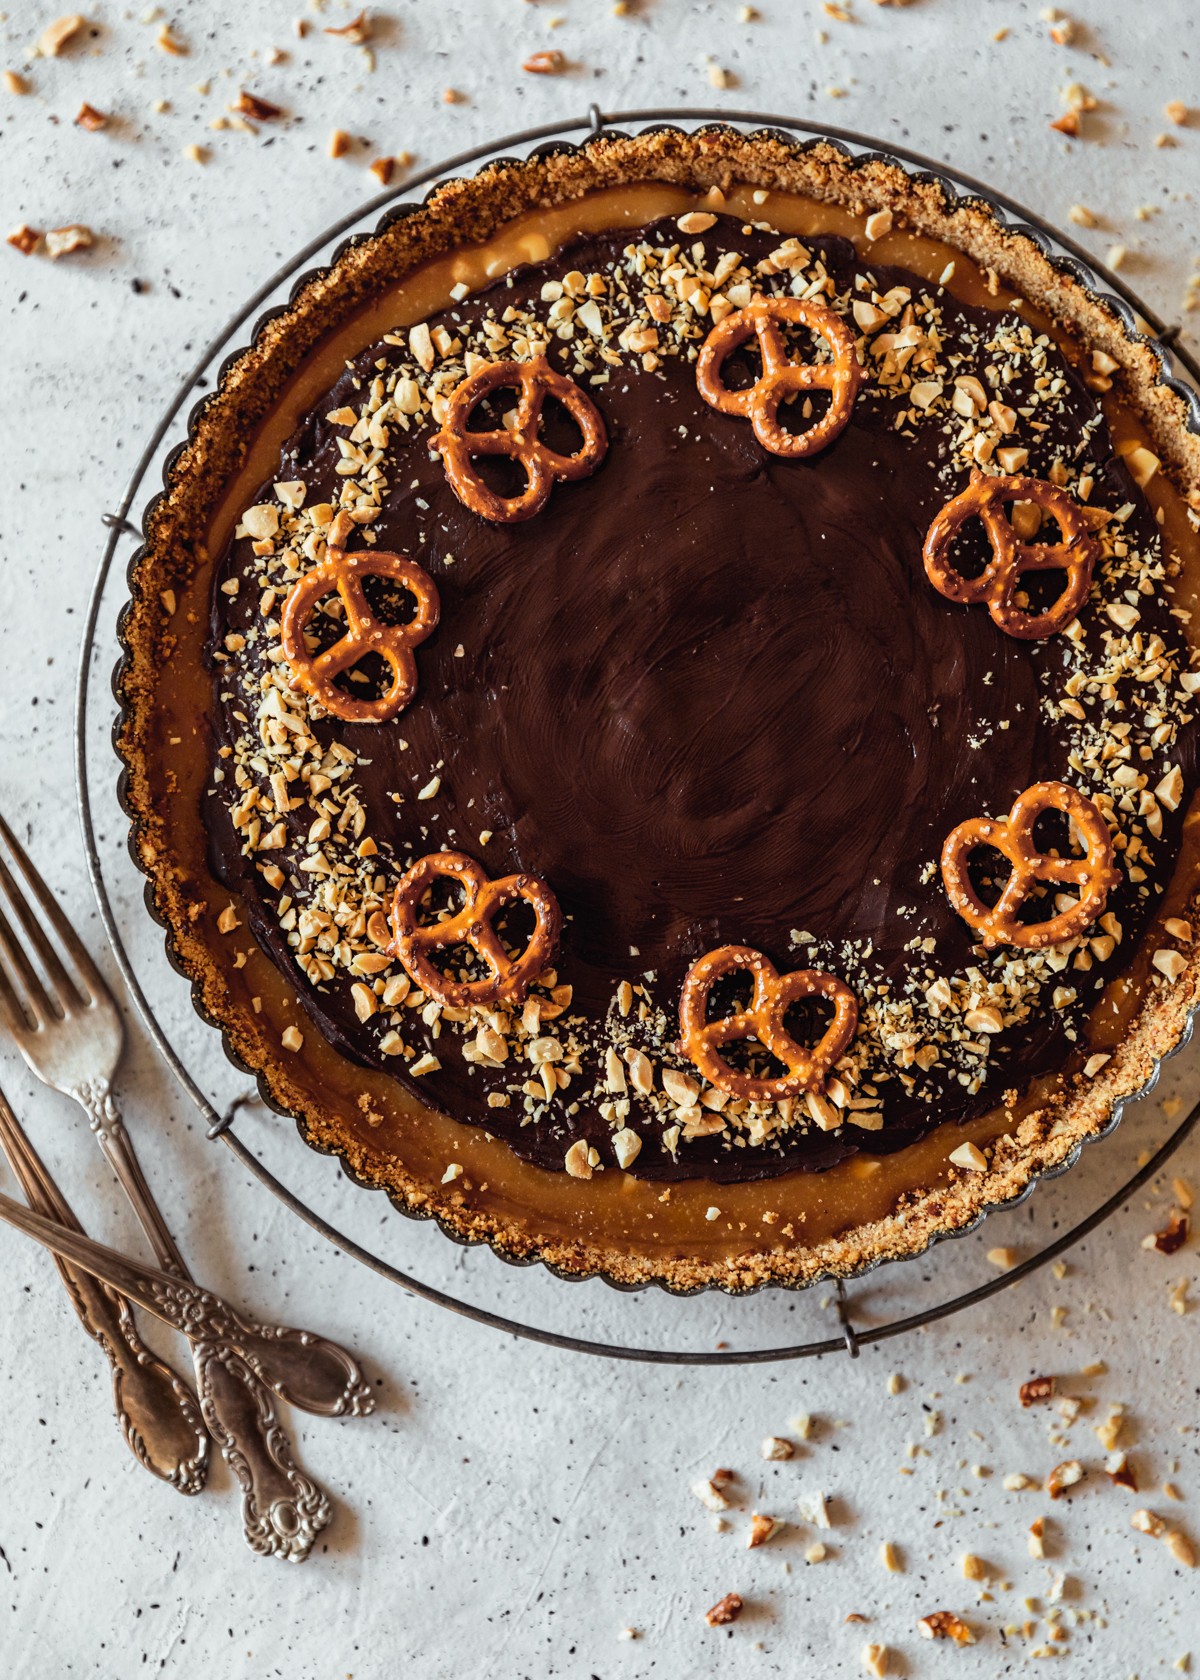 An closeup overhead image of a chocolate caramel tart decorated with chopped peanuts and pretzels. The tart is on a vintage metal cooling rack on a white speckled counter next to vintage forks and chopped peanuts.